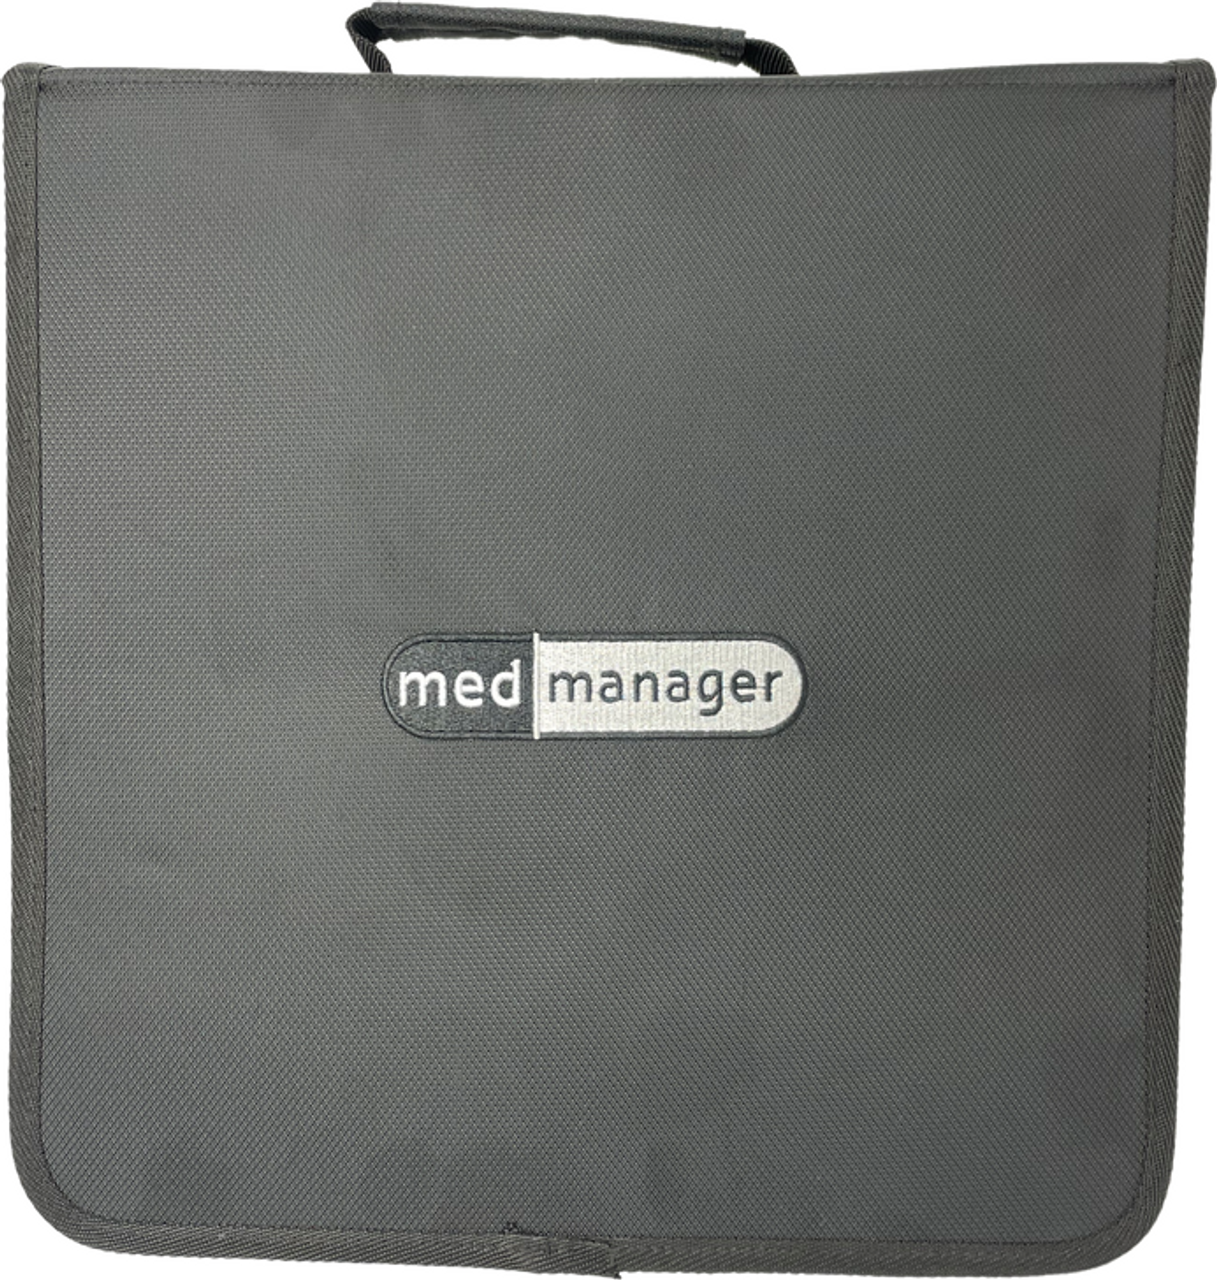 Med Manager Deluxe Medicine Organizer and Pill Case, Blue, 13" x  13" x 4.5"